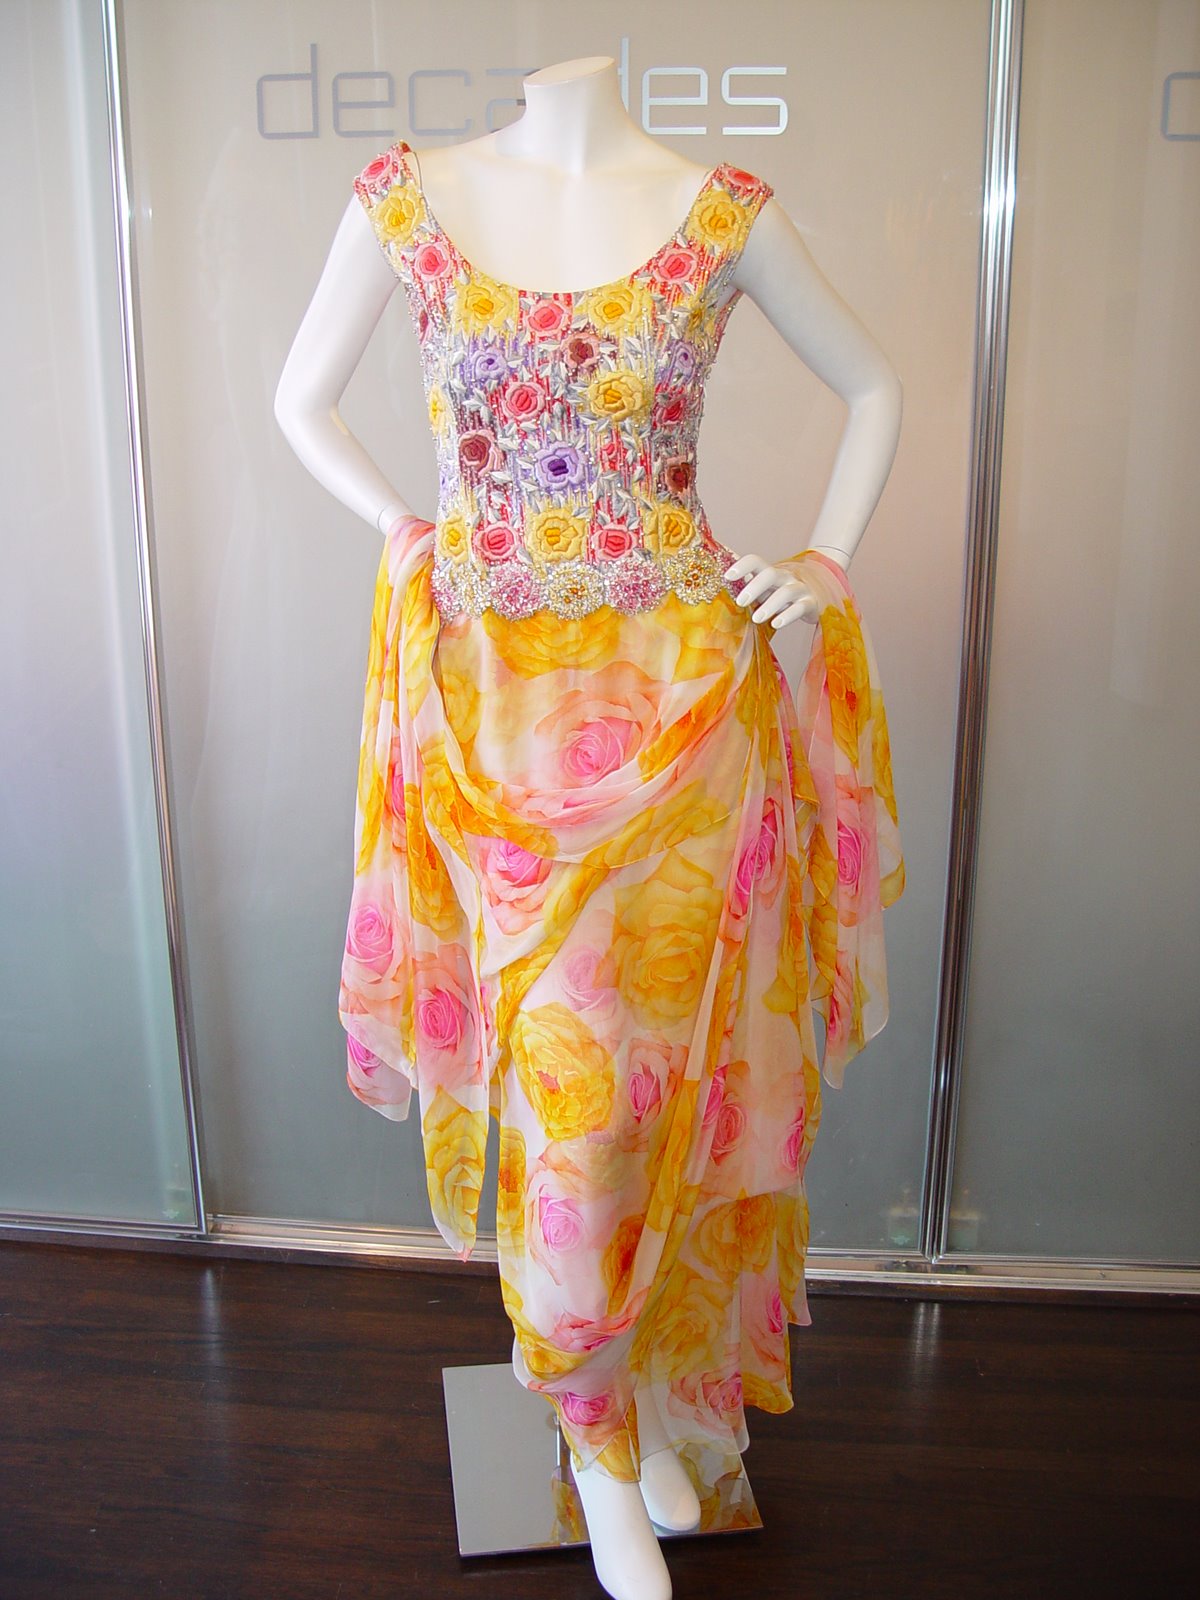 [GALANOS+FLORAL+CHIFFON+WITH+EMBROIDERED+BODY+-+1.JPG]